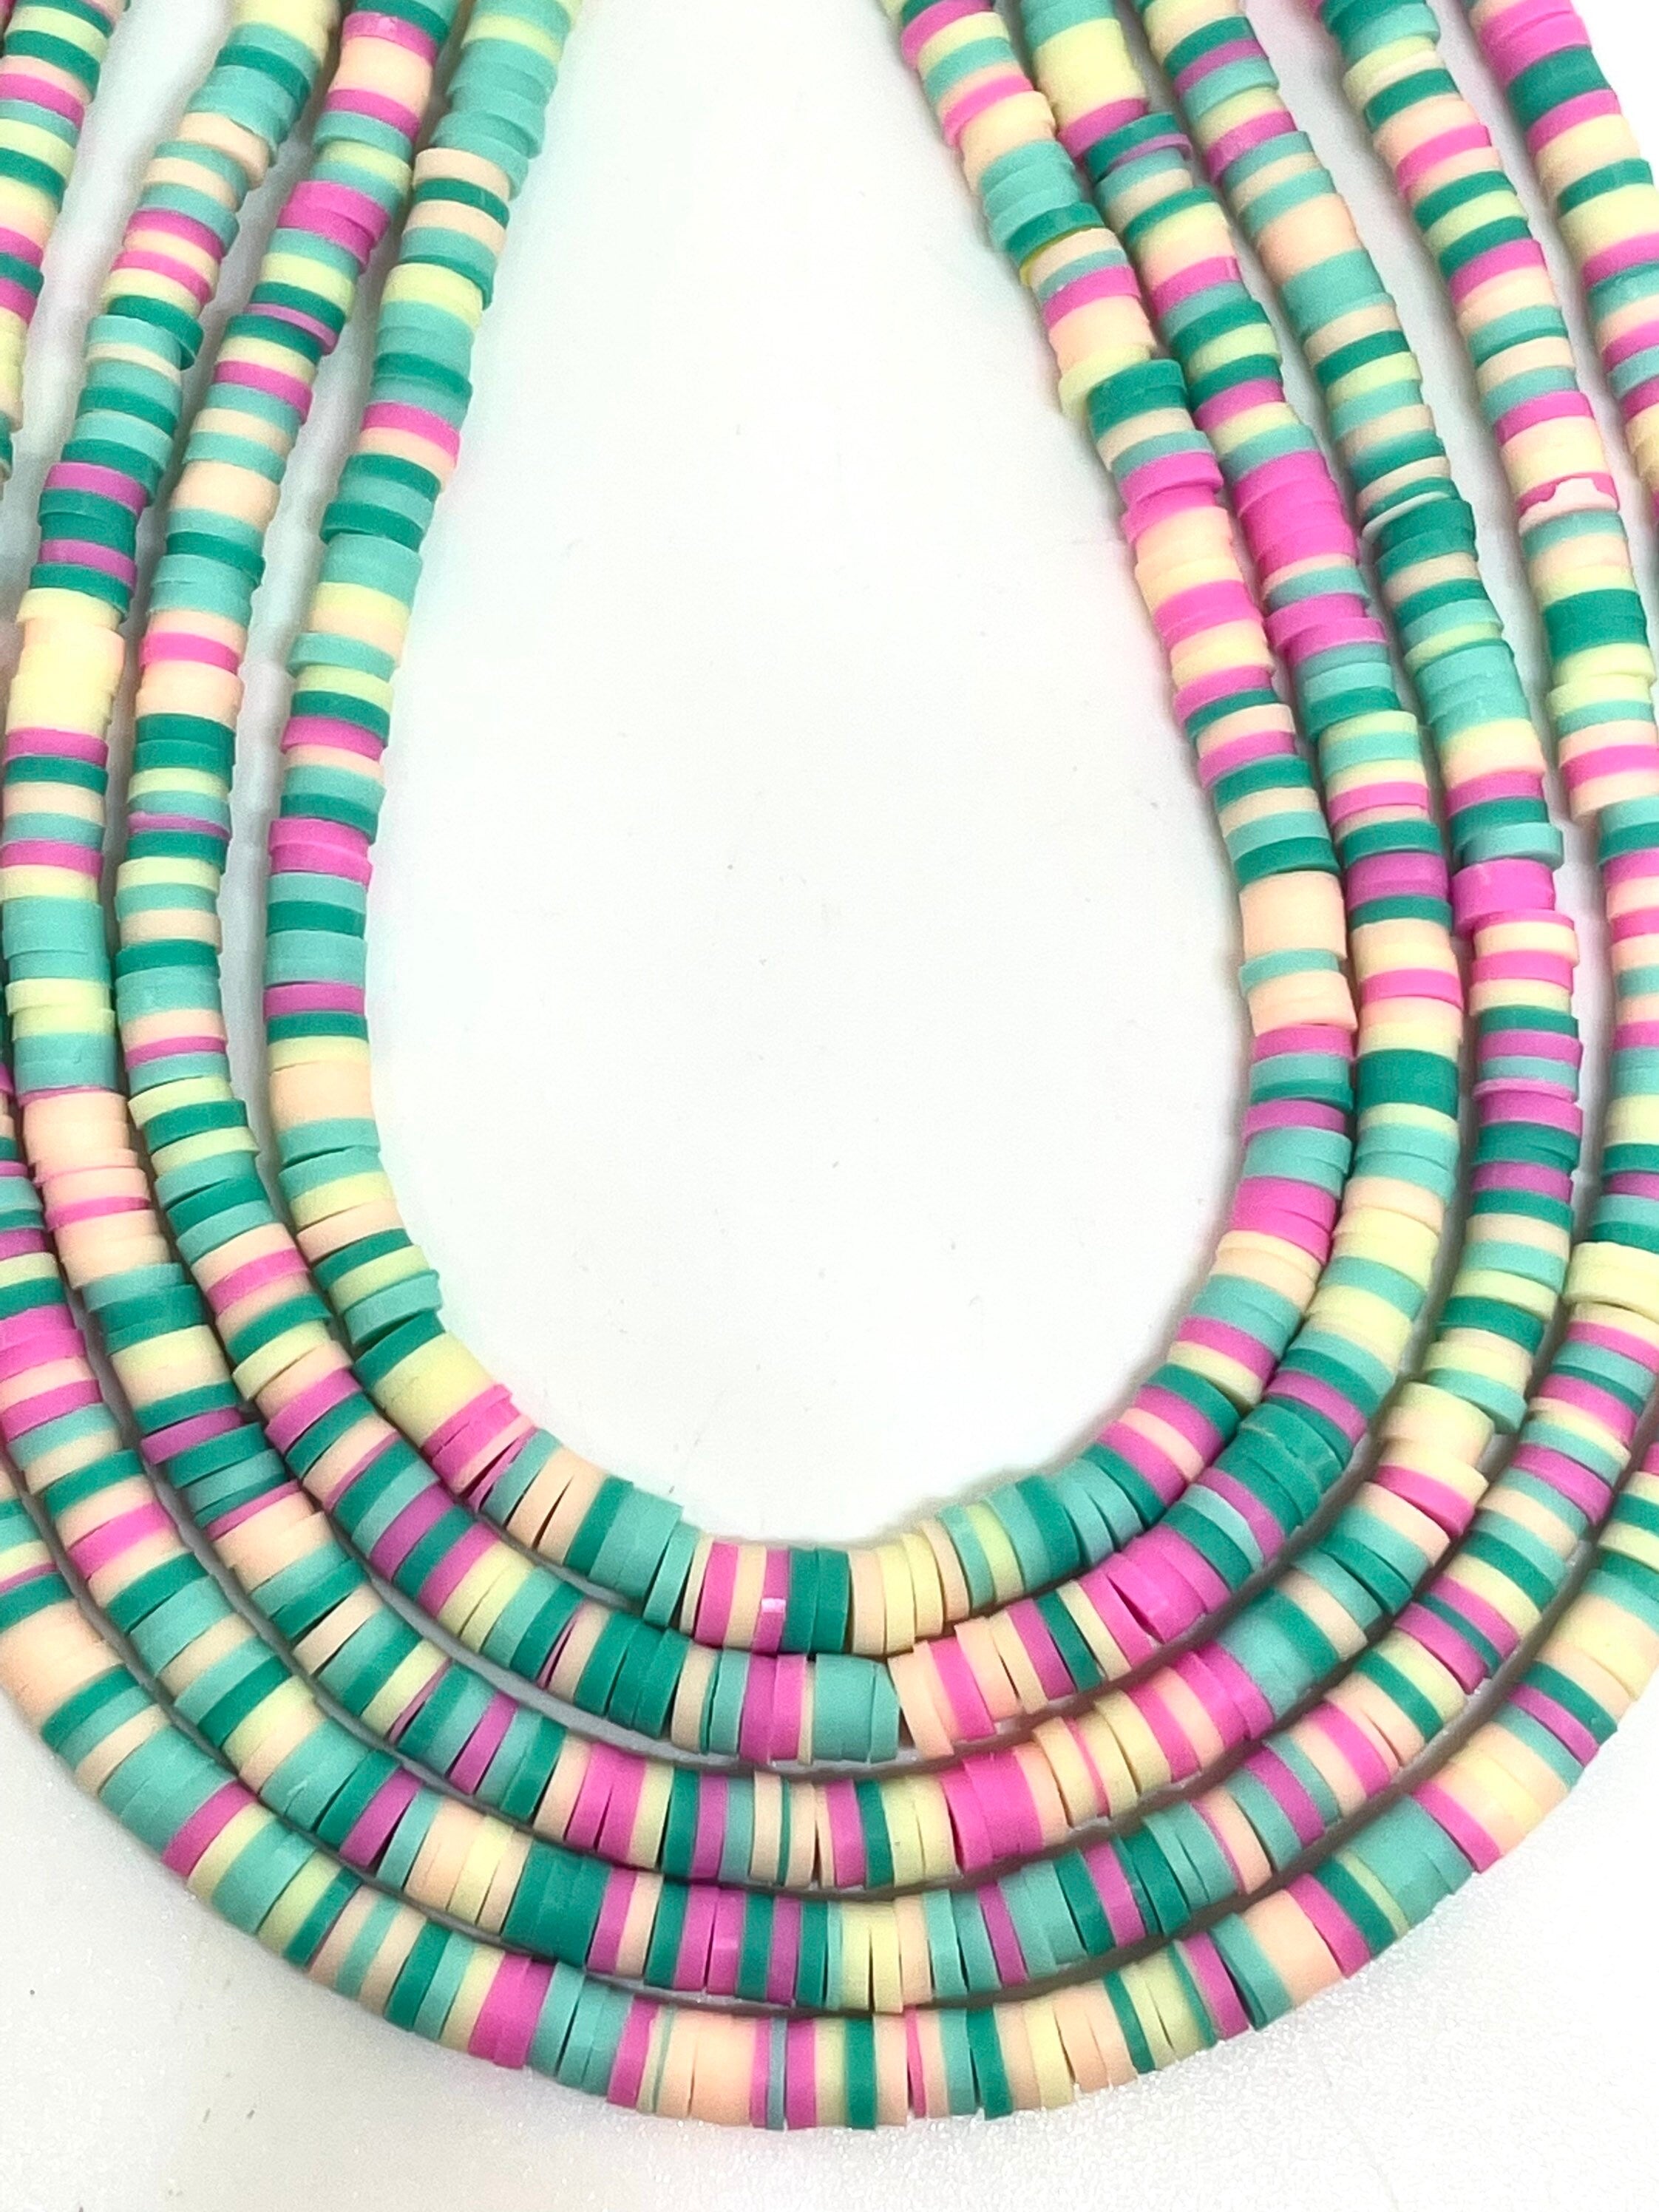 Mini Pastel Heishi Beads, Tropical Themed Necklace, Bead Set for Jewel